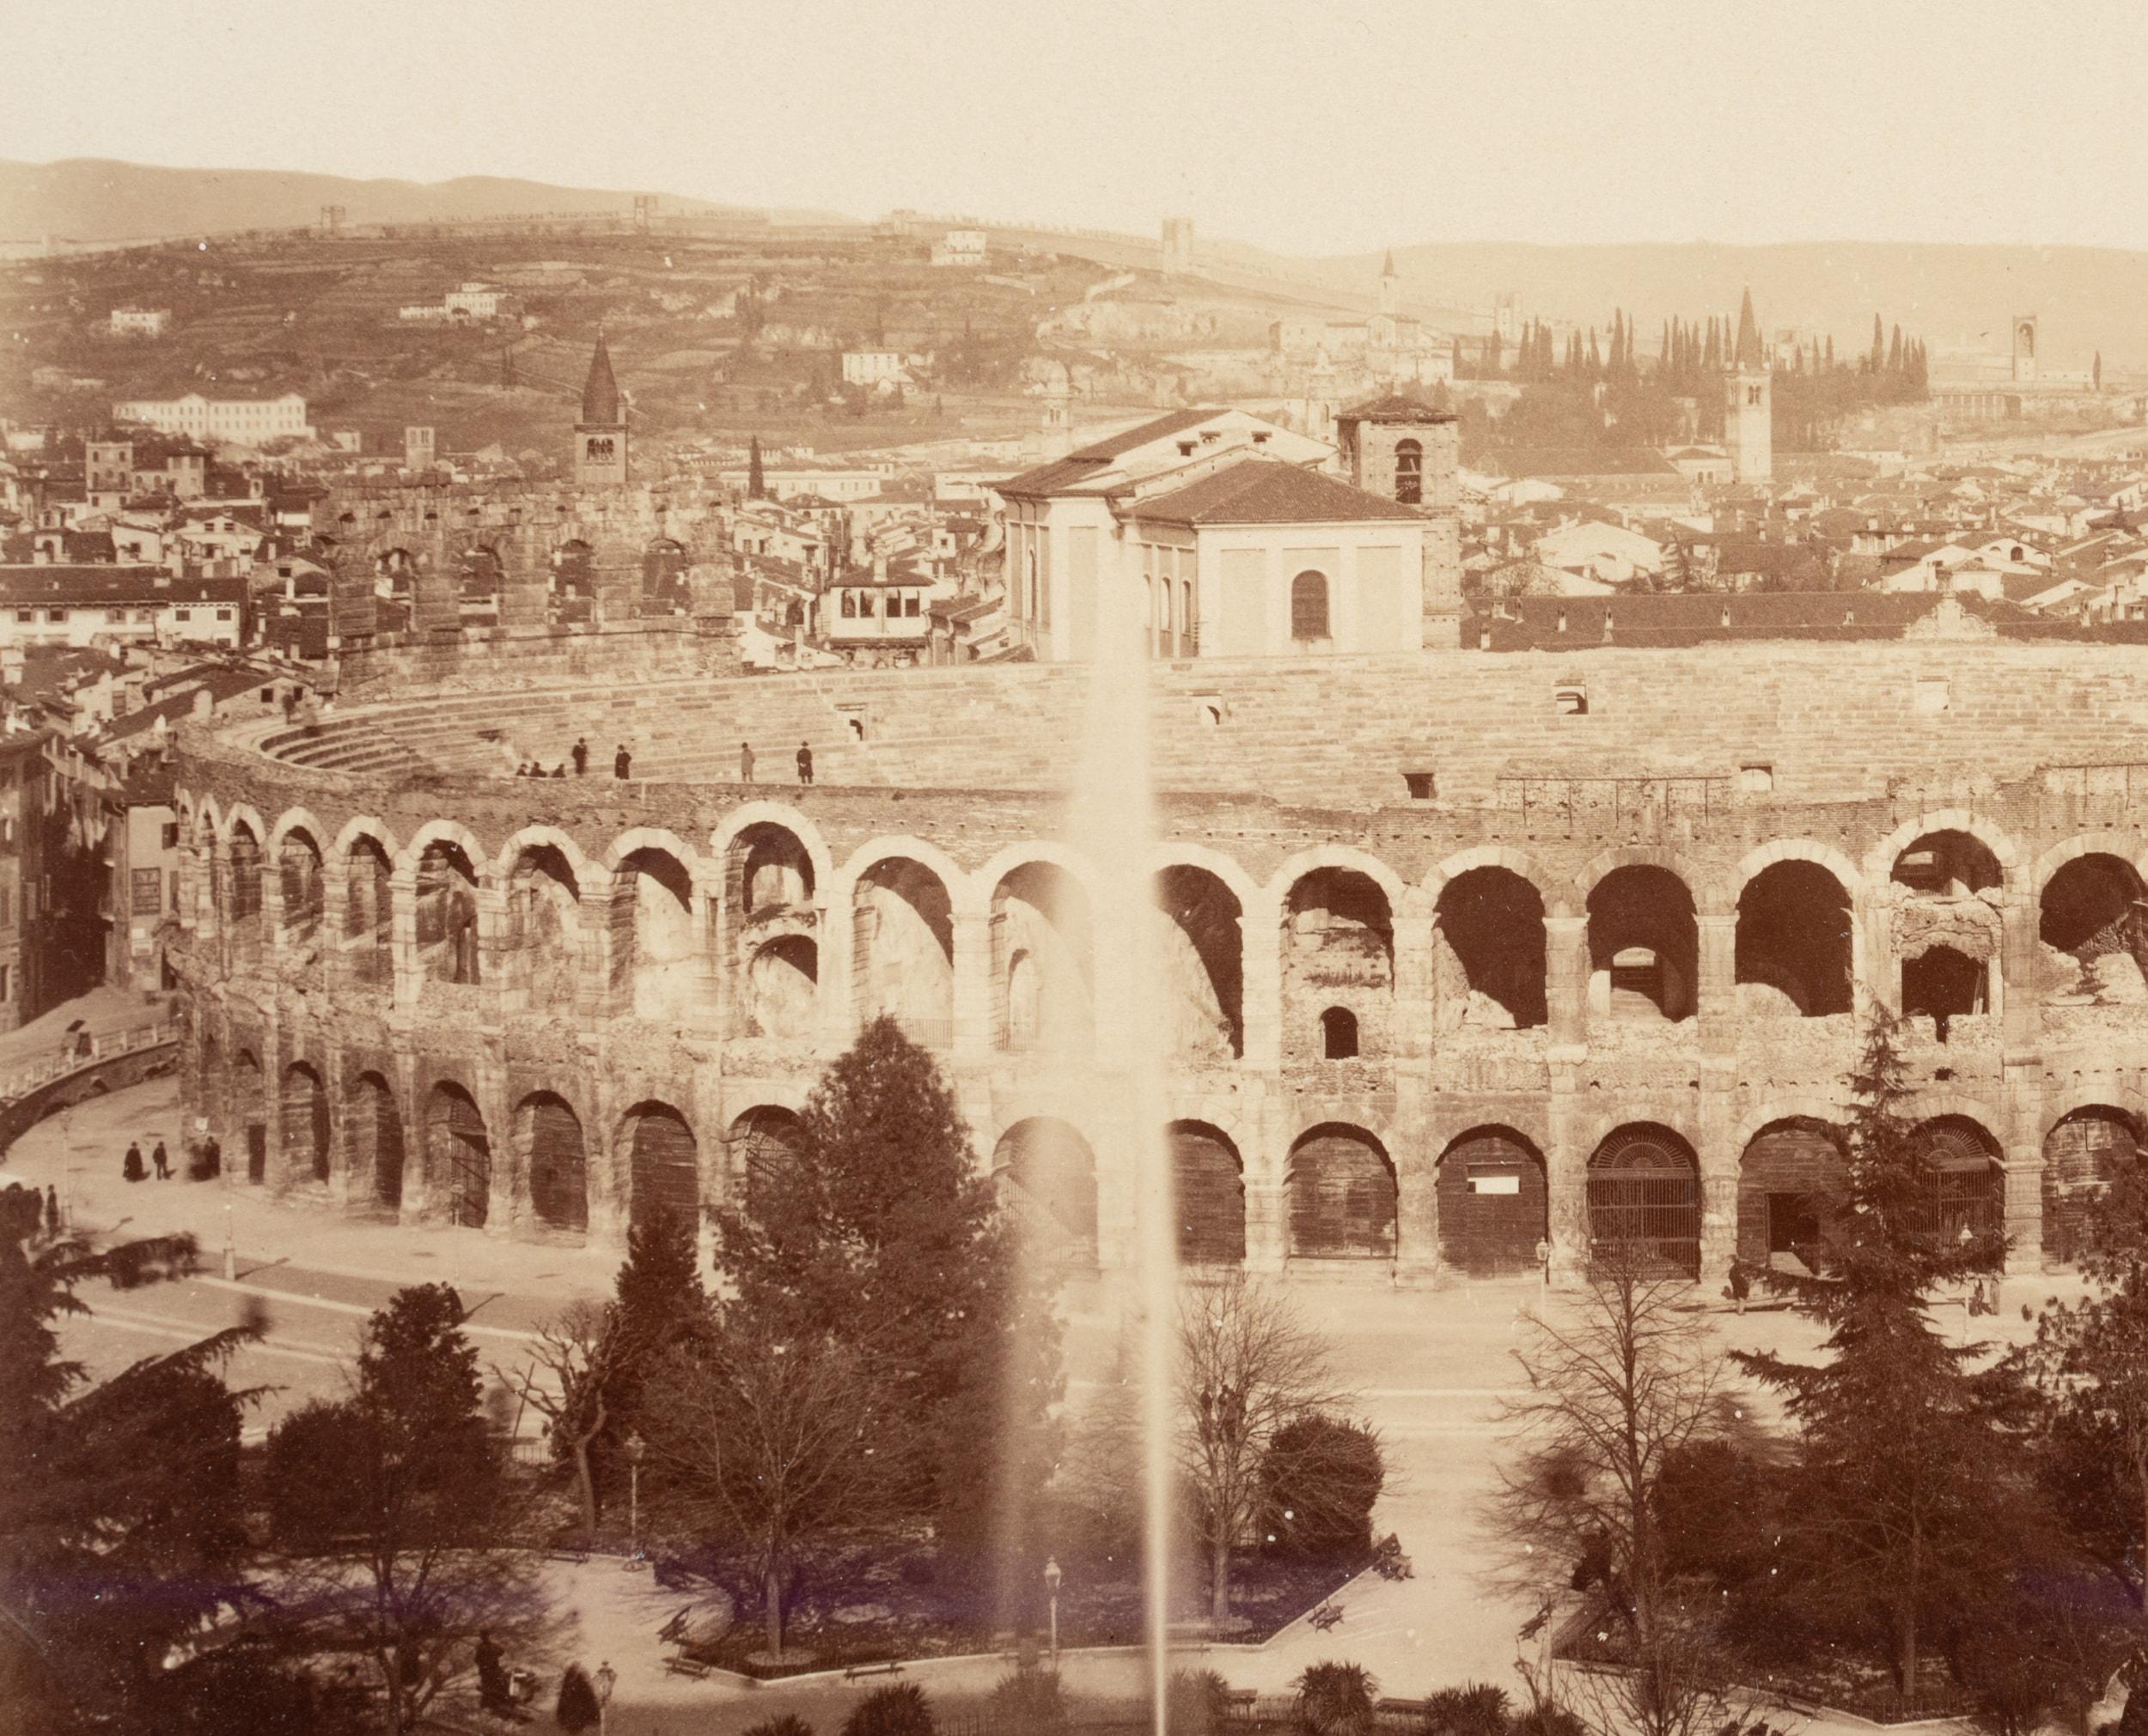 V. Florianello (19th century): View of the Arena of Verona from an elevated perspective Roman amphitheatre, c. 1880, albumen paper print

Technique: albumen paper print

Inscription: Lower right signed in the printing plate: 